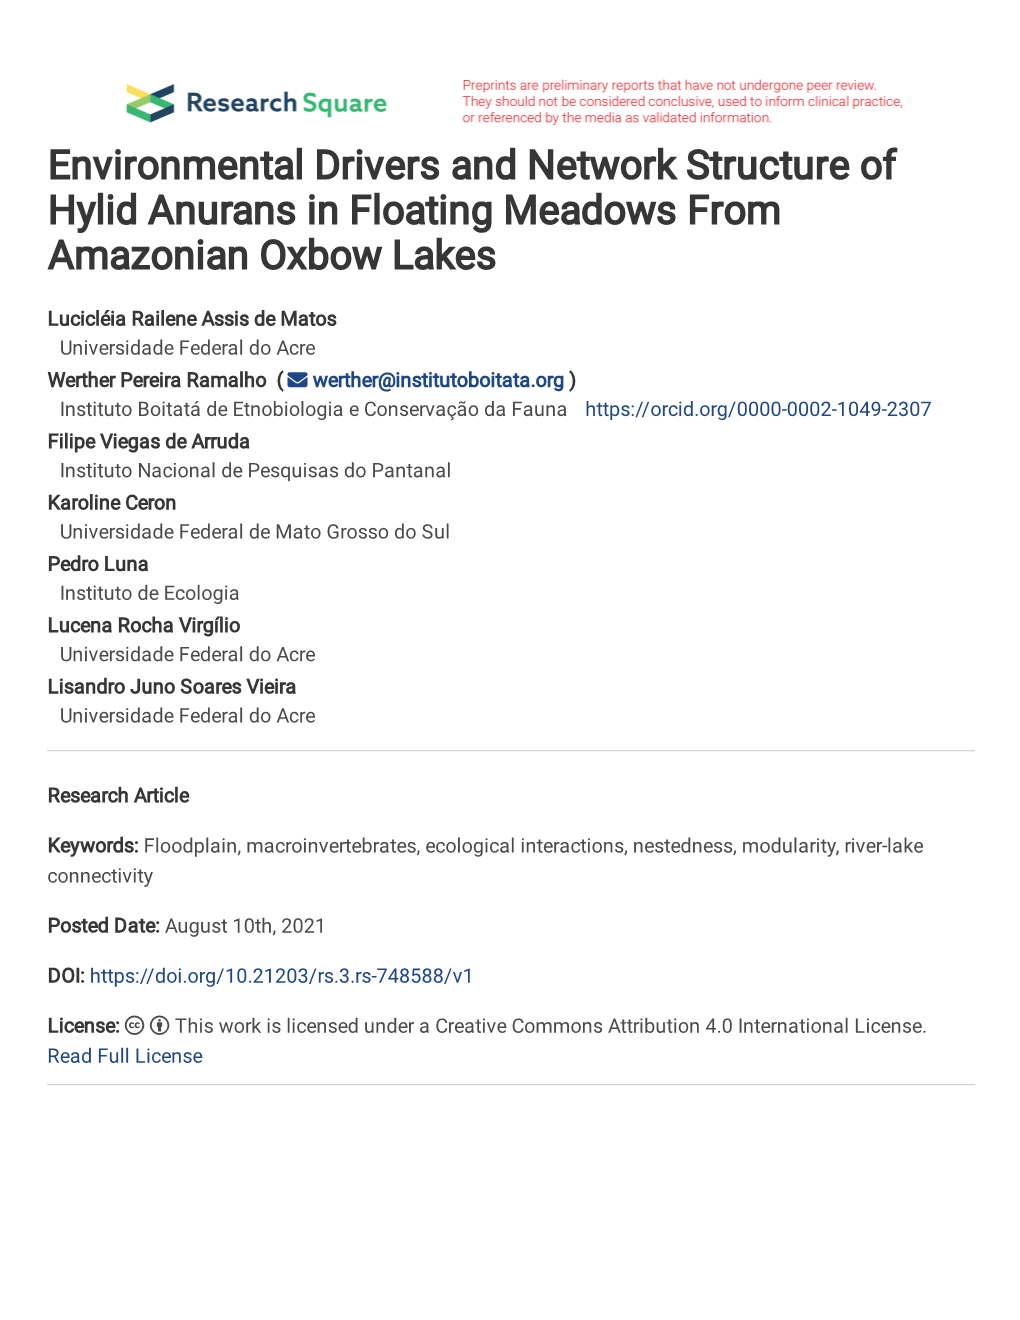 Environmental Drivers and Network Structure of Hylid Anurans in Floating Meadows from Amazonian Oxbow Lakes